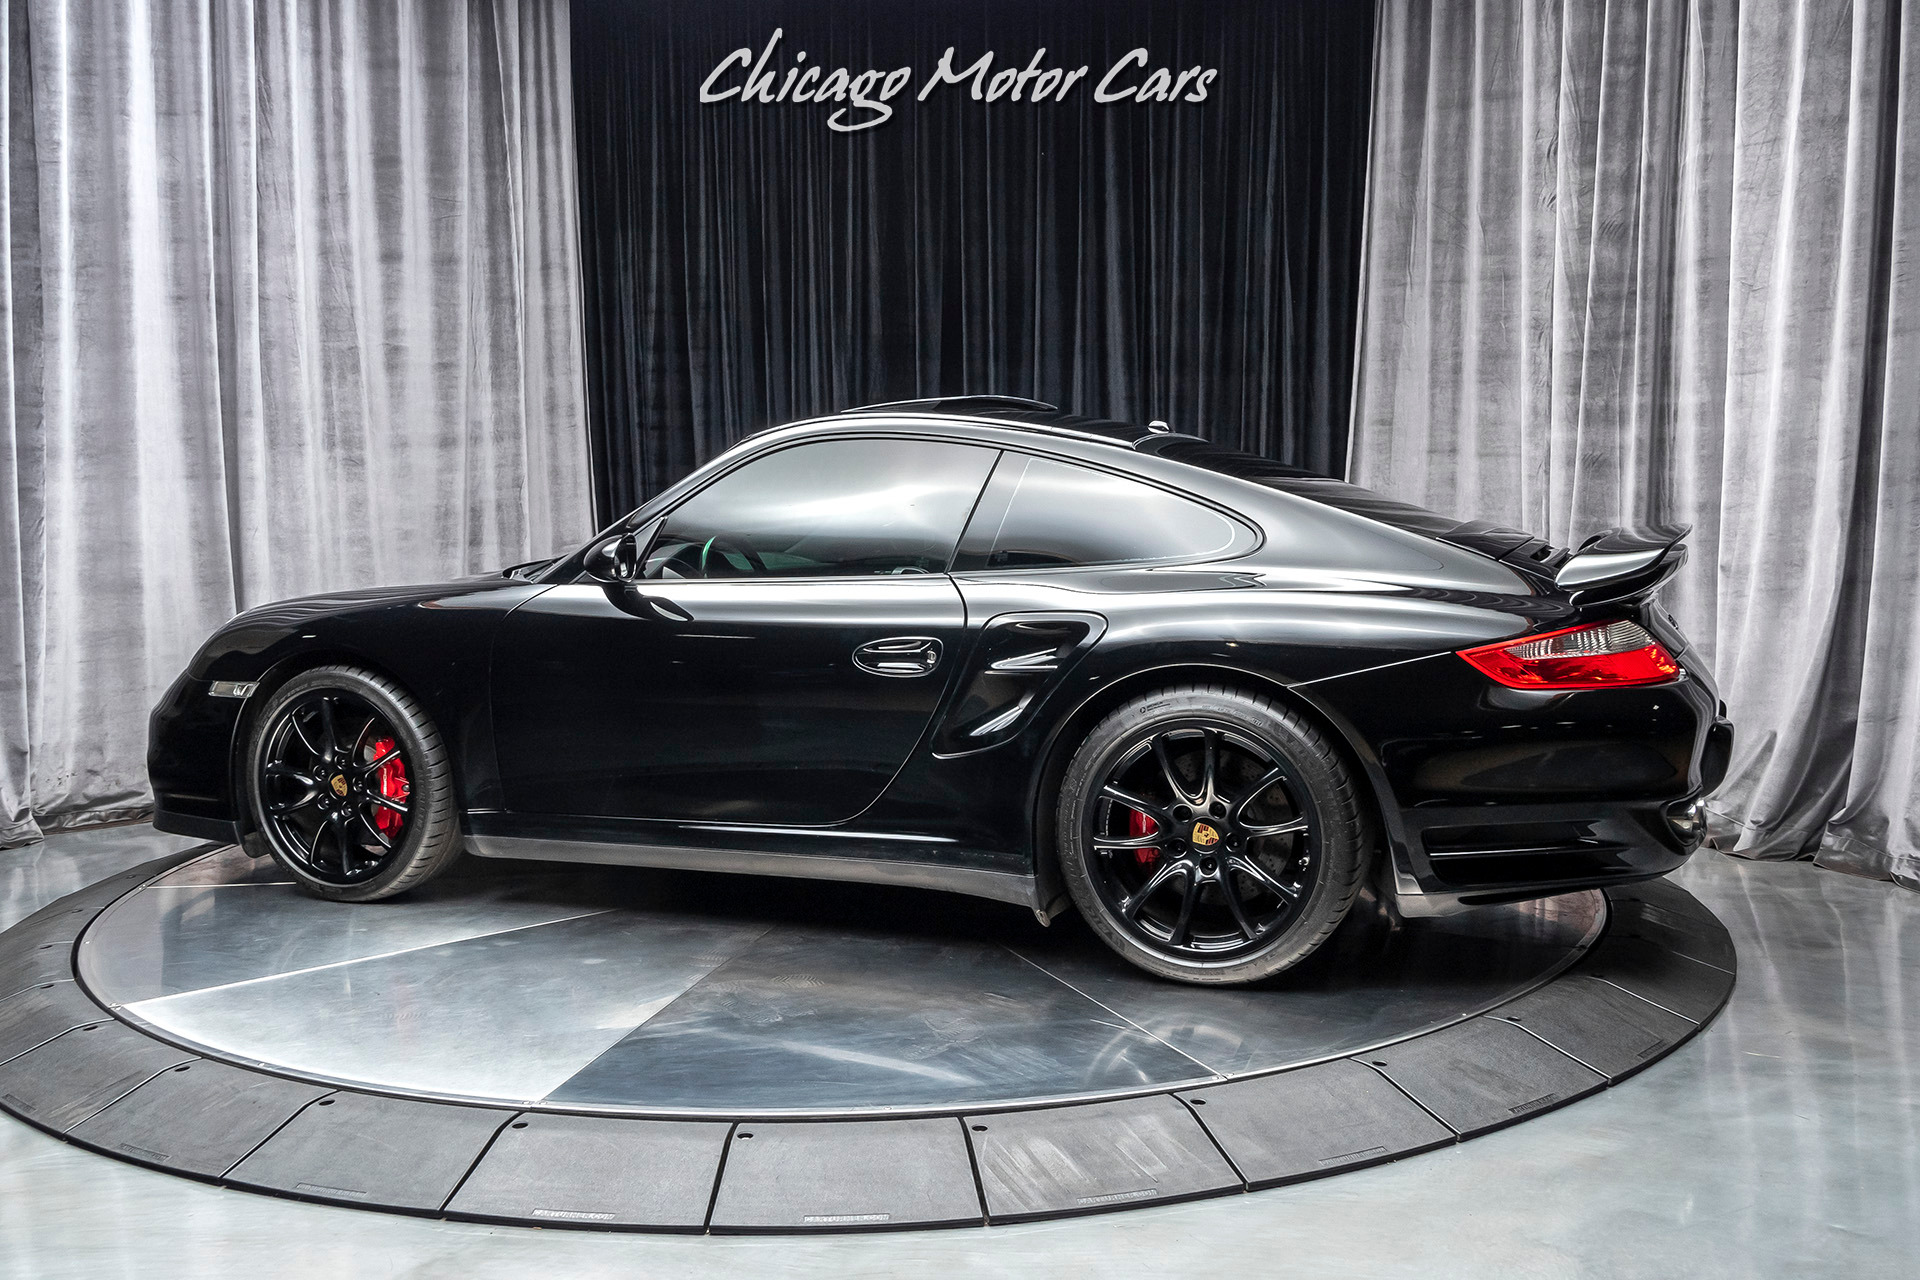 Used-2009-Porsche-911-Turbo-Coupe---Original-145k-MSRP-Only-12k-Miles-6-Speed-Manual